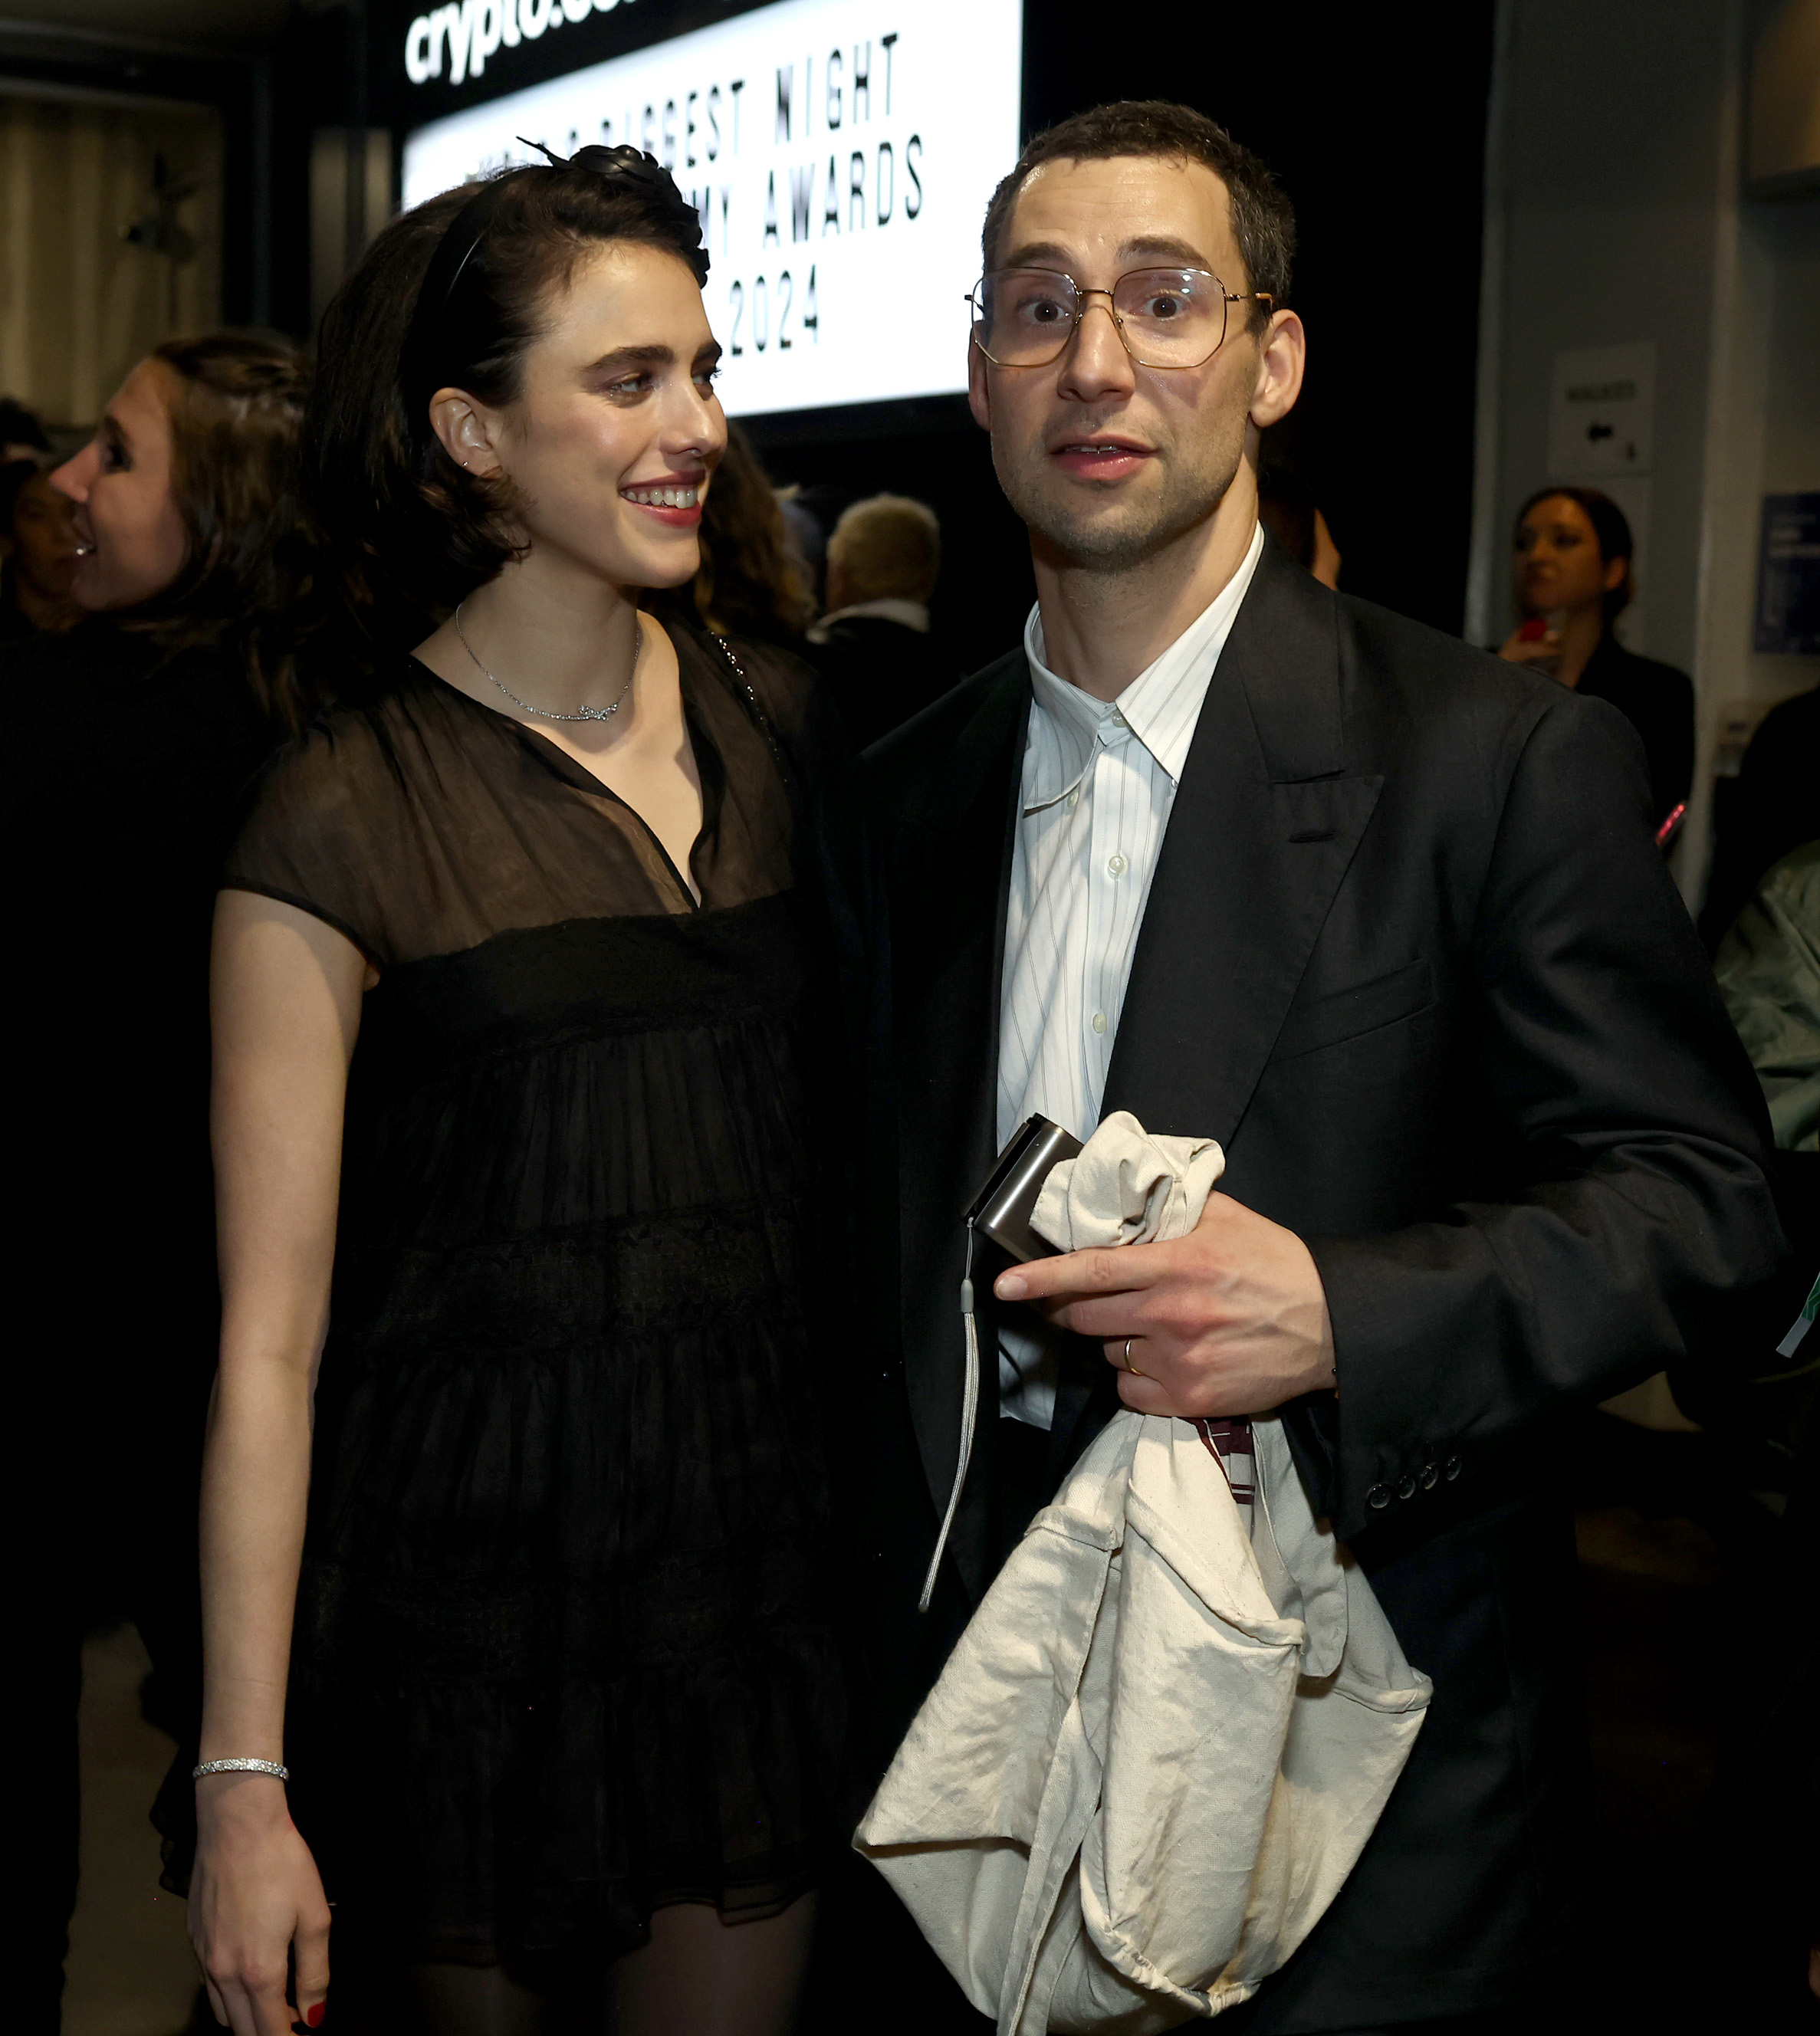 Margaret Qualley and Jack Antonoff backstage at the Grammys